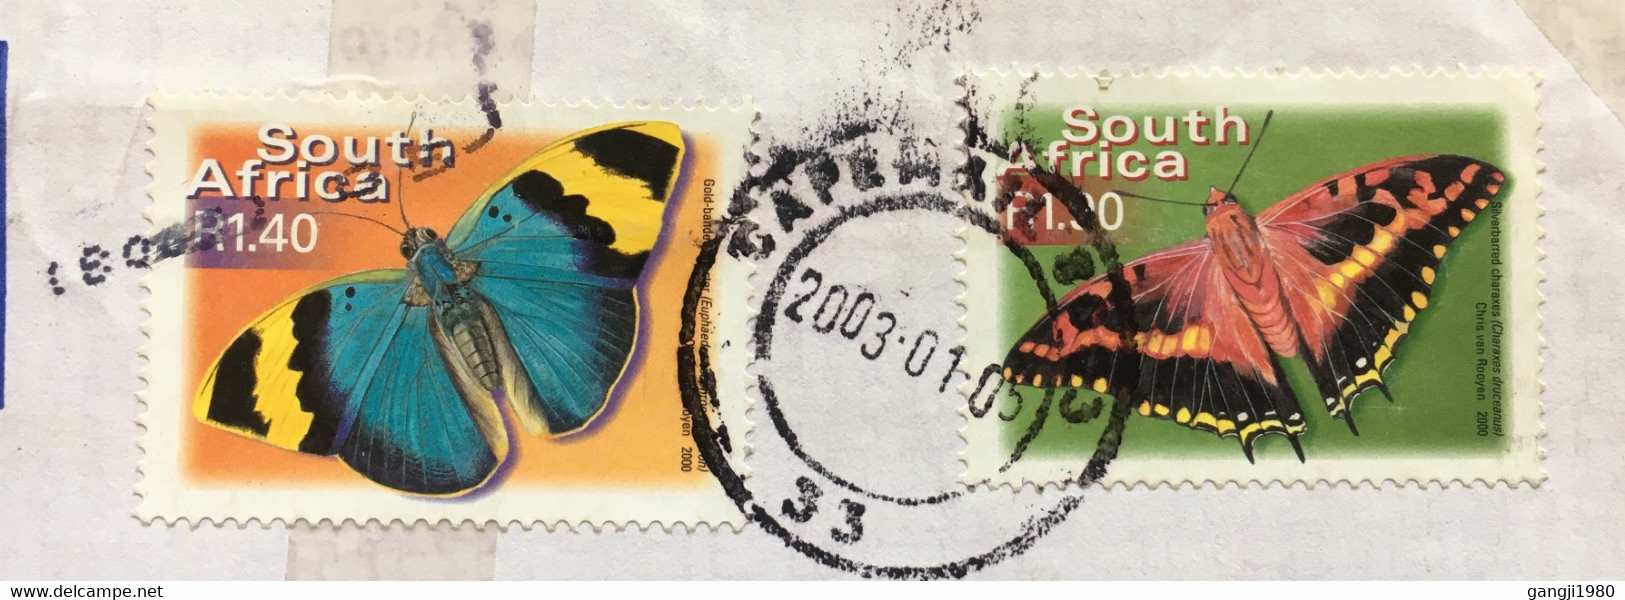 SOUTH AFRICA 2003, AIRMAIL COVER 2 DIFFERENT BUTTERFLY STAMPS ,CAPETOWN CITY TO INDIA - Brieven En Documenten